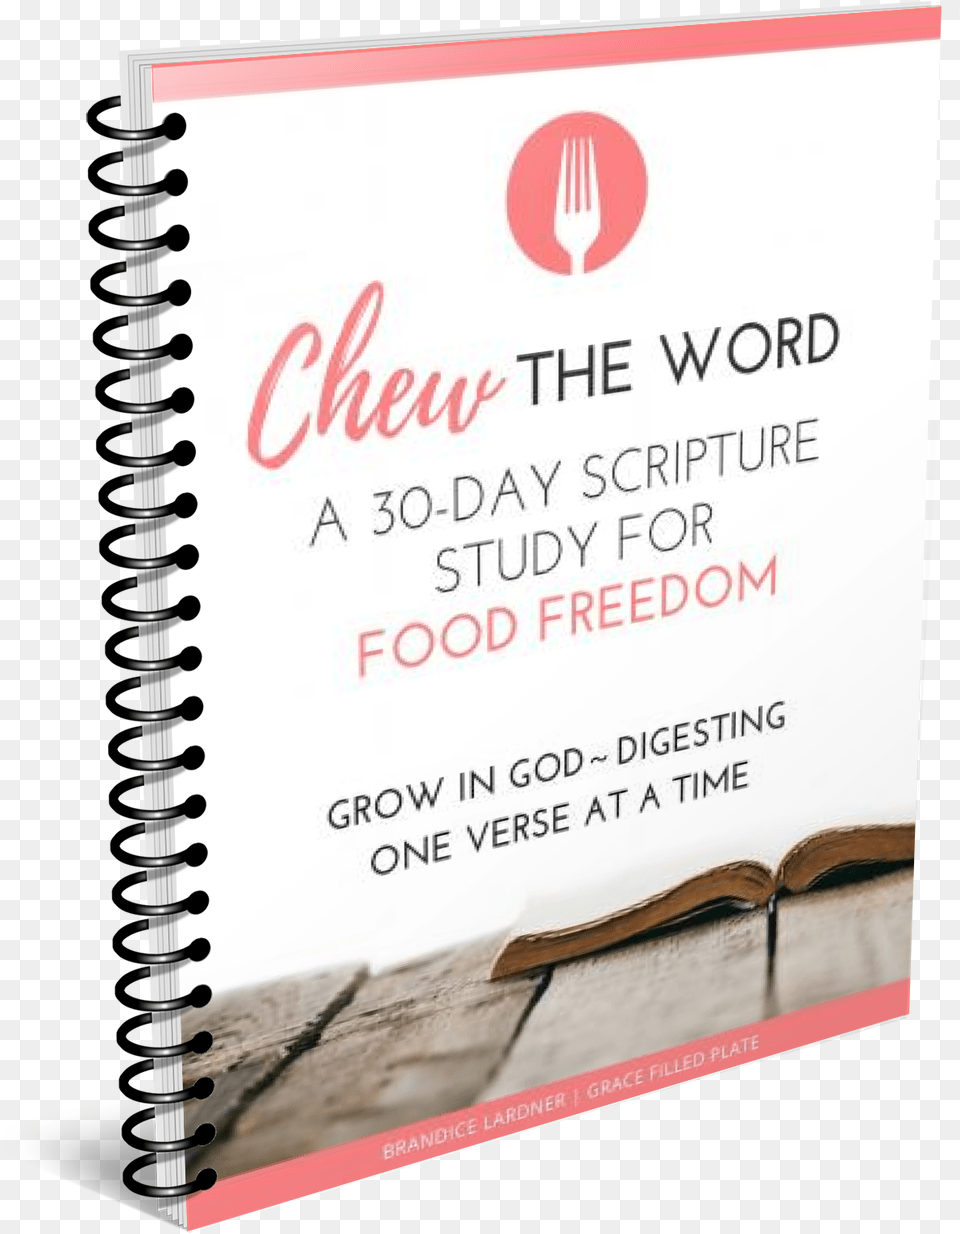 Chew The Word, Book, Page, Publication, Text Png Image